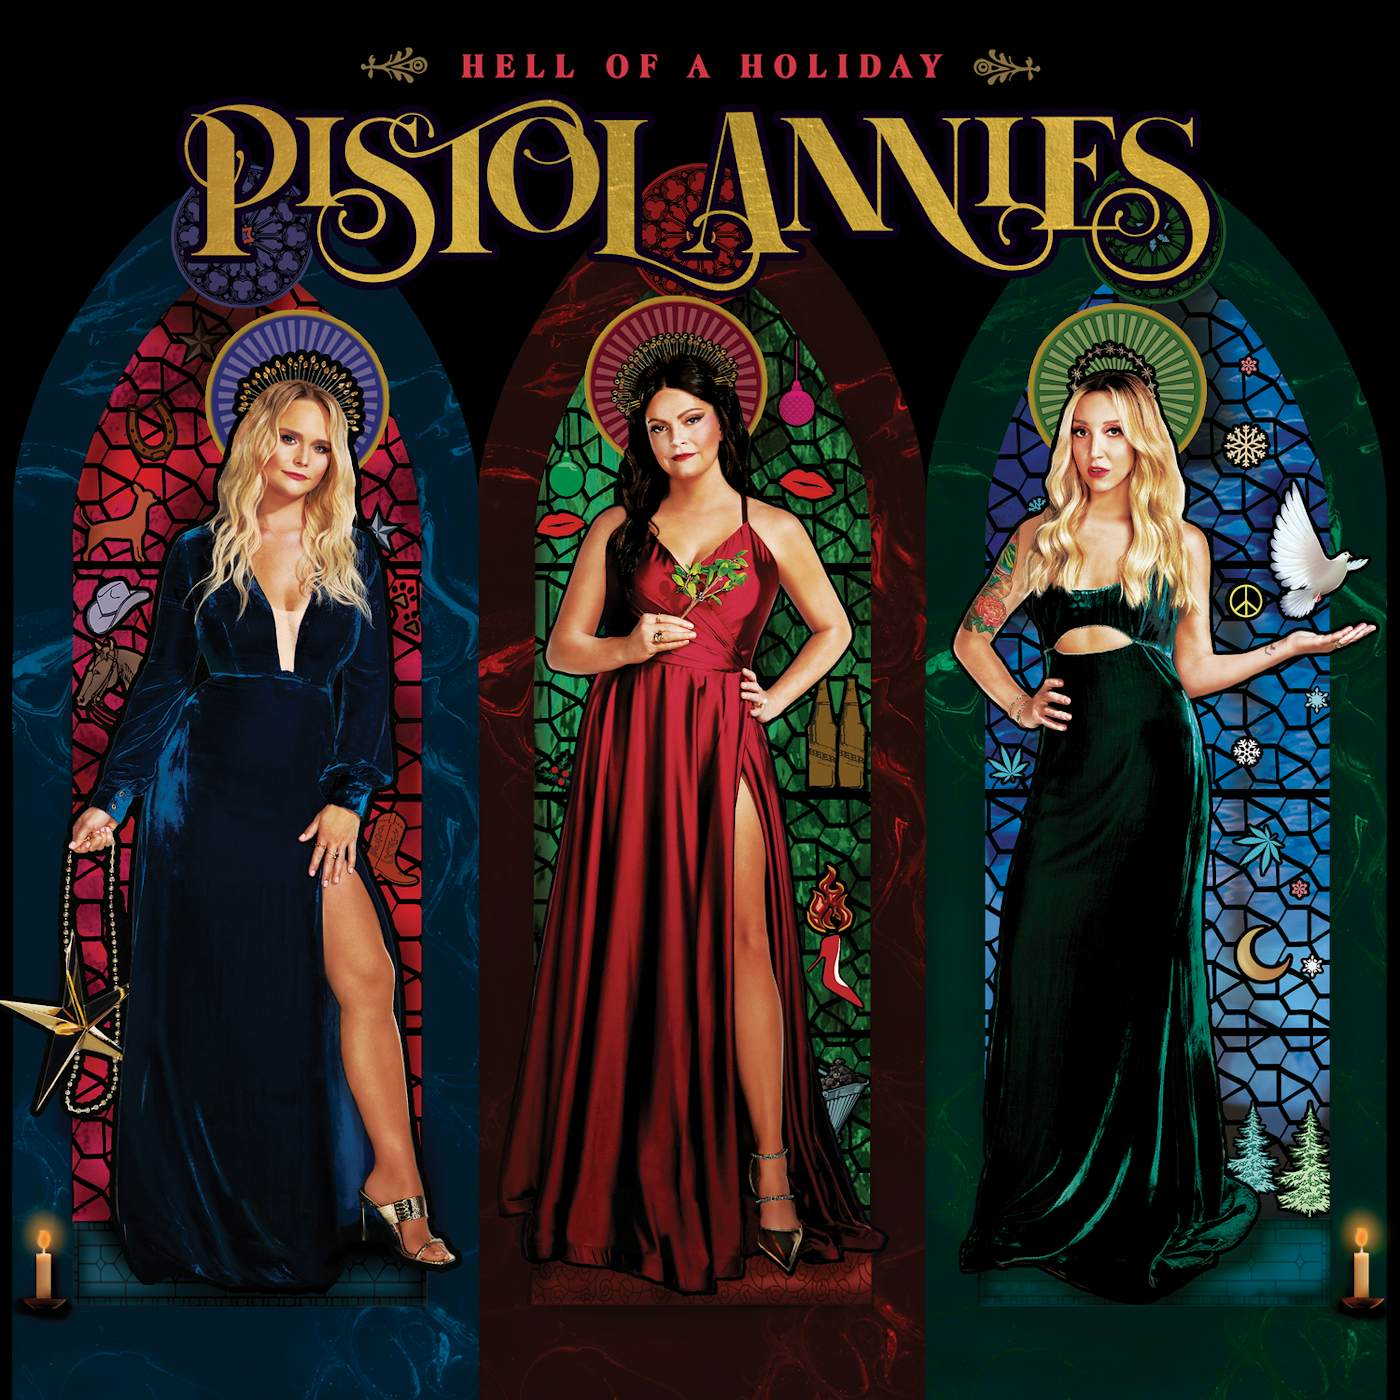 Pistol Annies Hell of a Holiday Vinyl Record